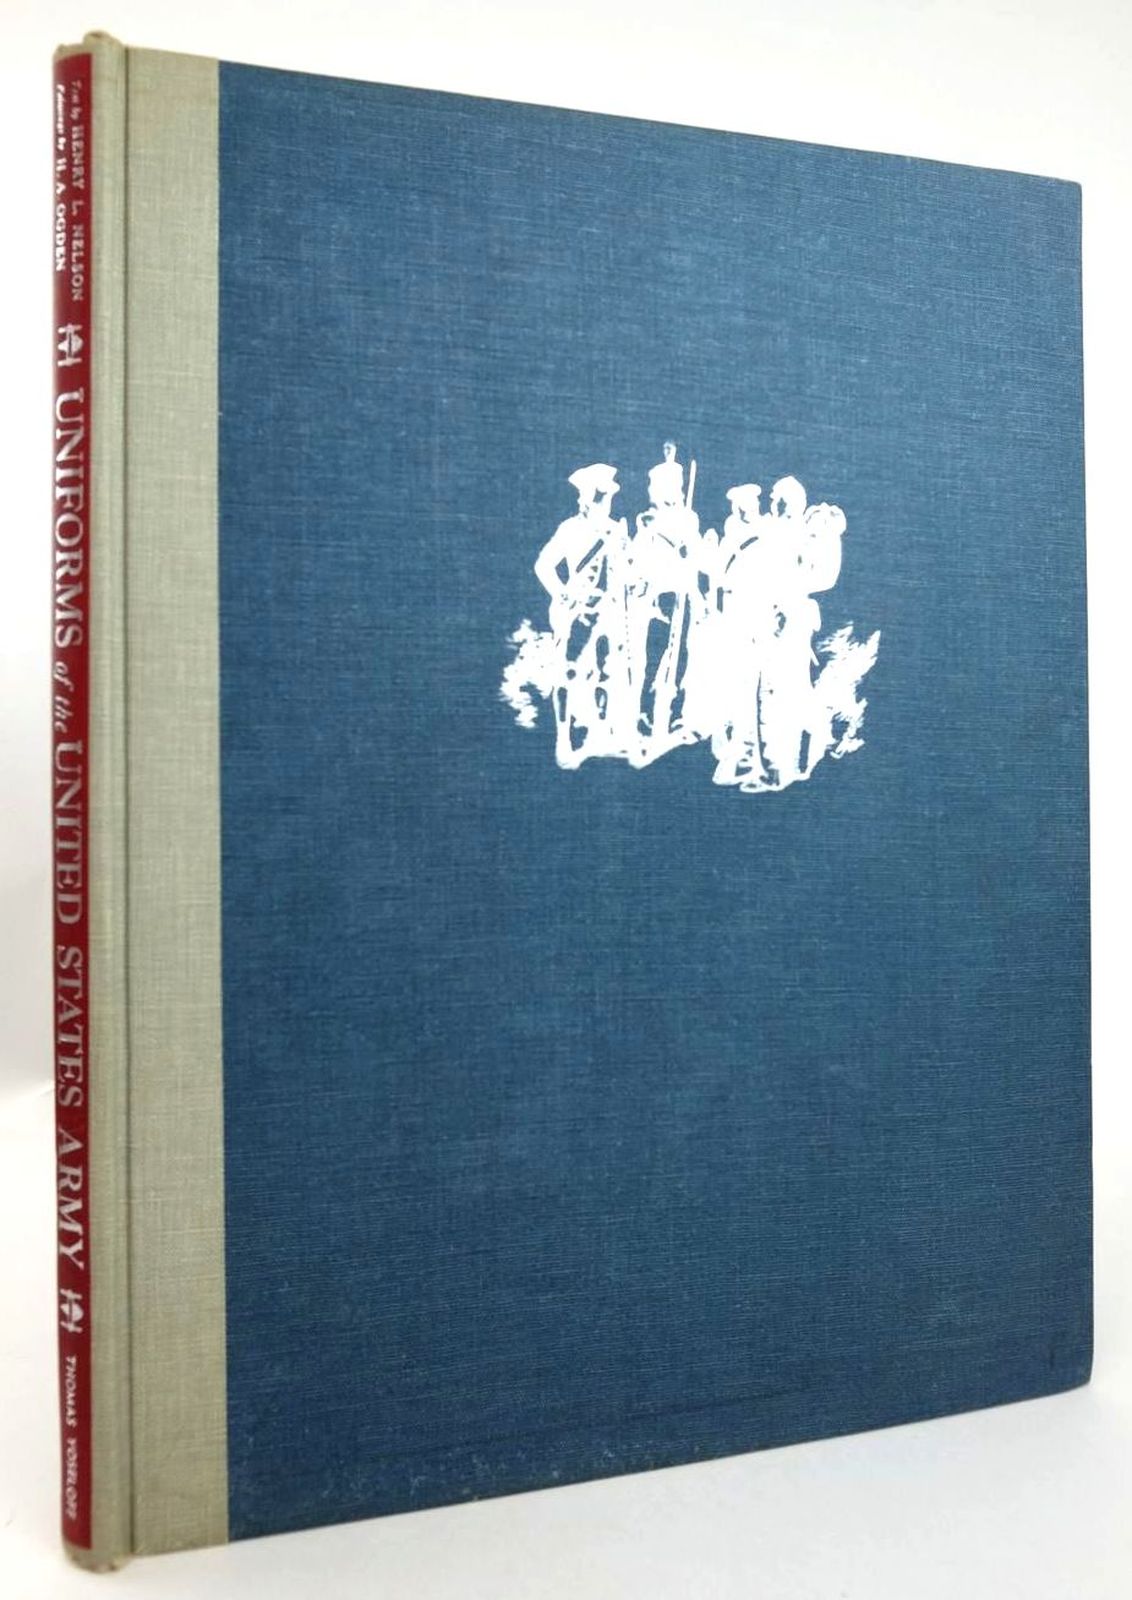 Photo of UNIFORMS OF THE UNITED STATES ARMY written by Nelson, Henry Loomis illustrated by Ogden, H.A. published by Thomas Yoseloff (STOCK CODE: 1819991)  for sale by Stella & Rose's Books